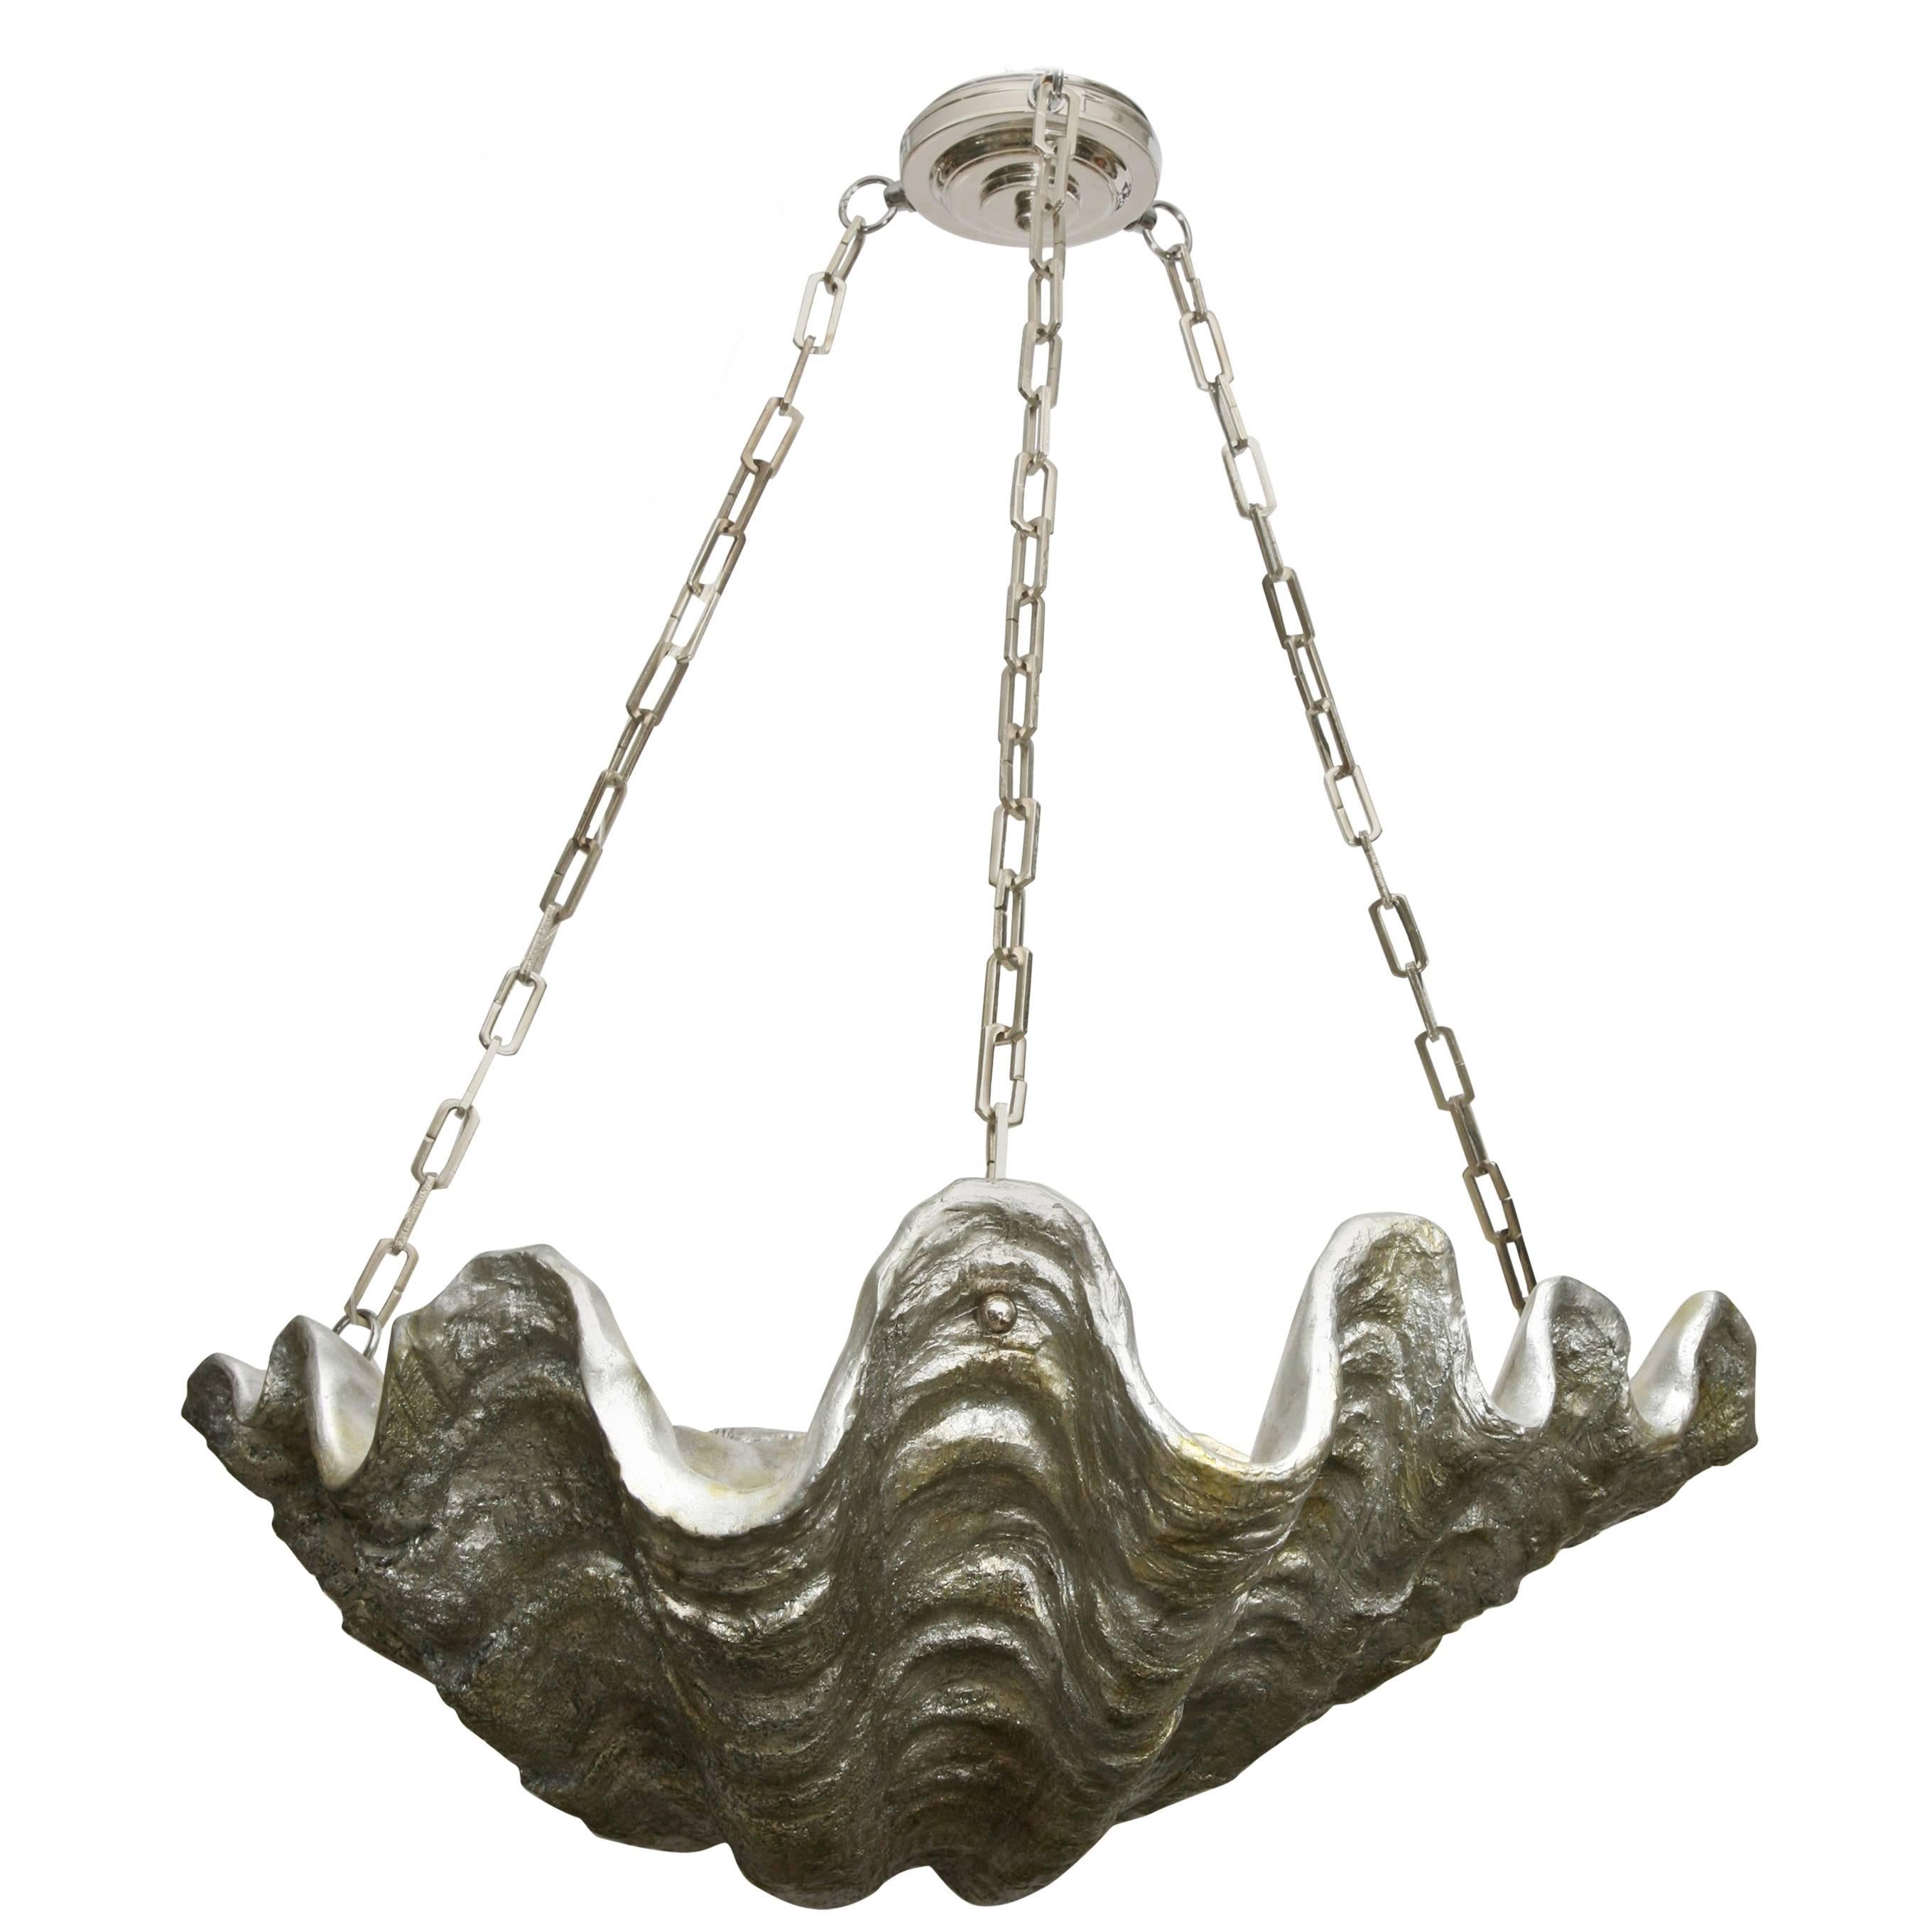 Large-Scale, Bespoke, Hollywood-Regency, Silver and Chrome Clam Shell Chandelier